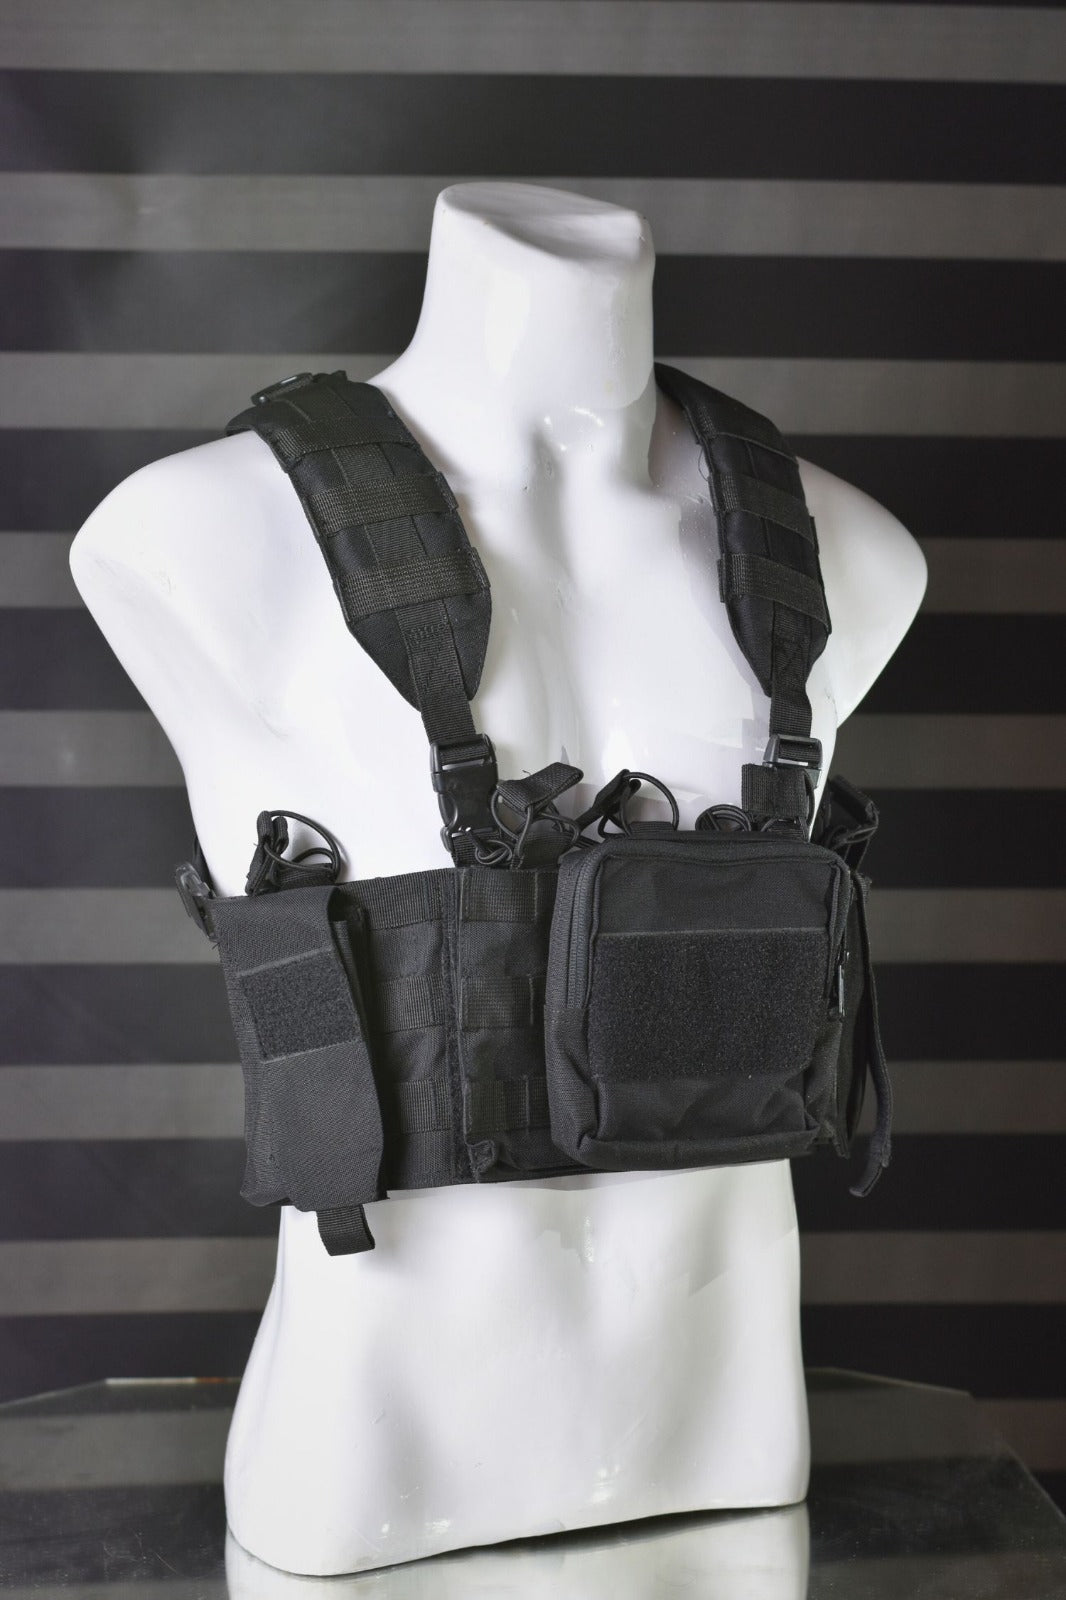 Raider Chest Rig with Accessories